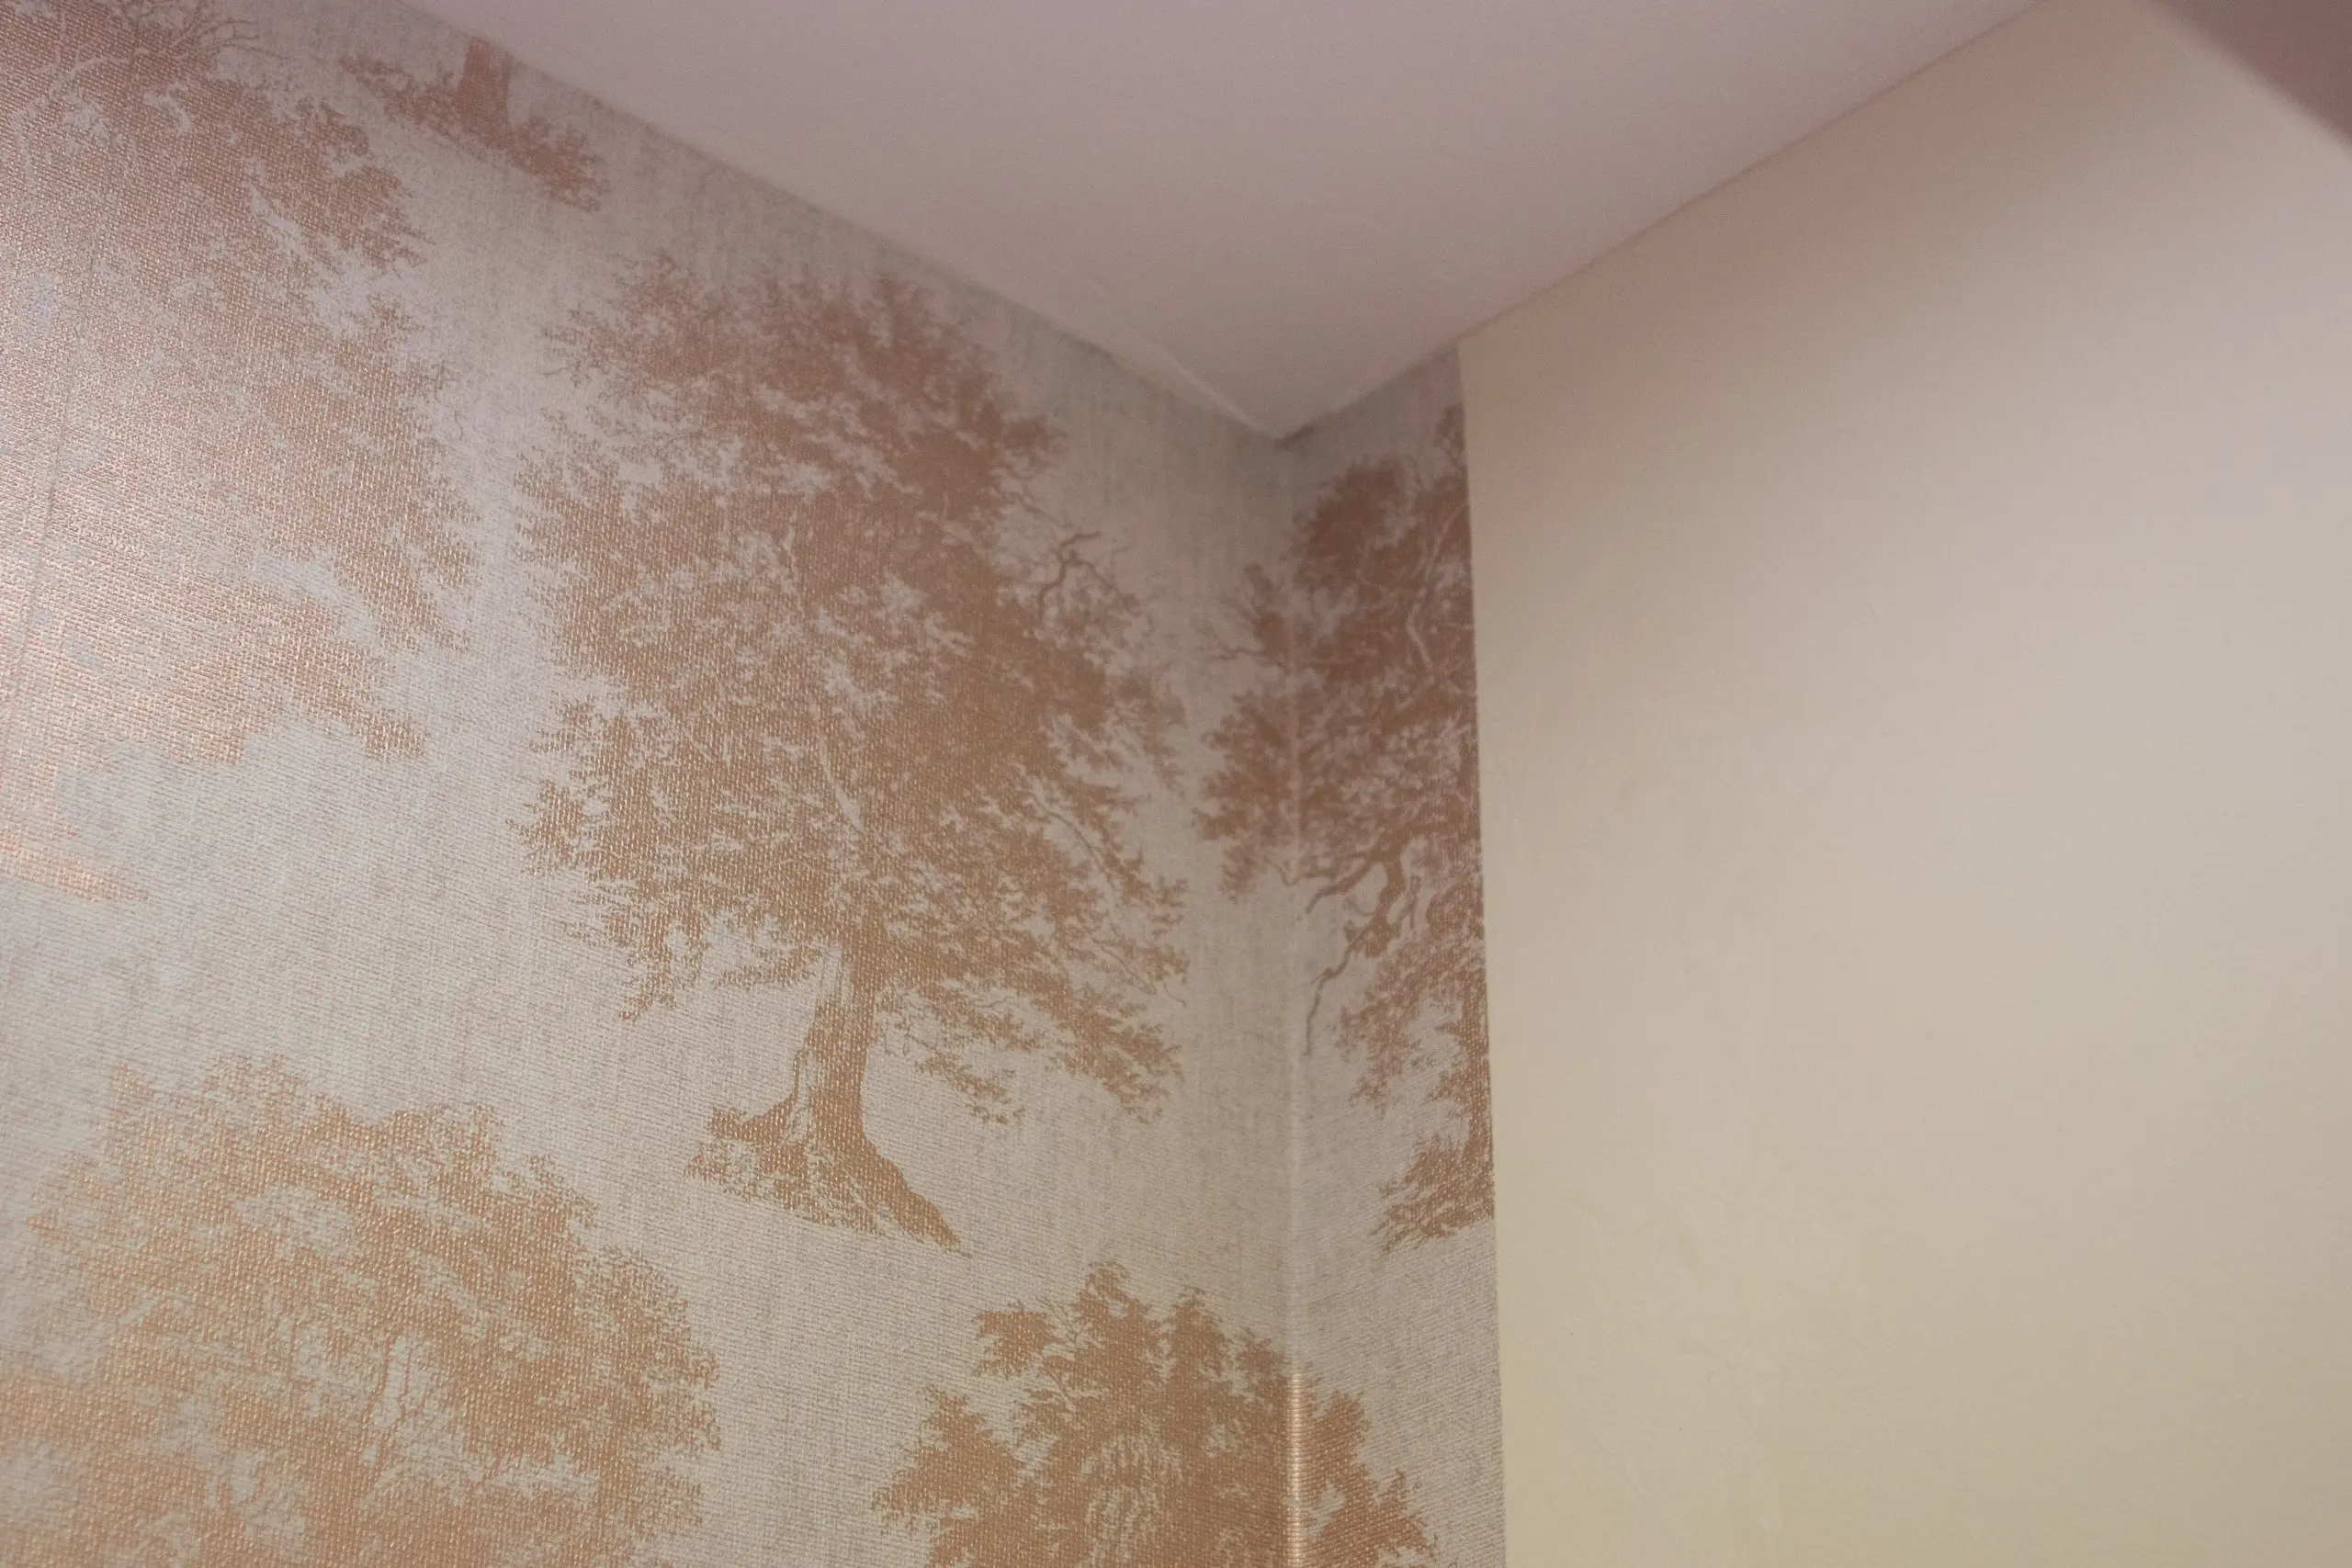 How to wallpaper a corner